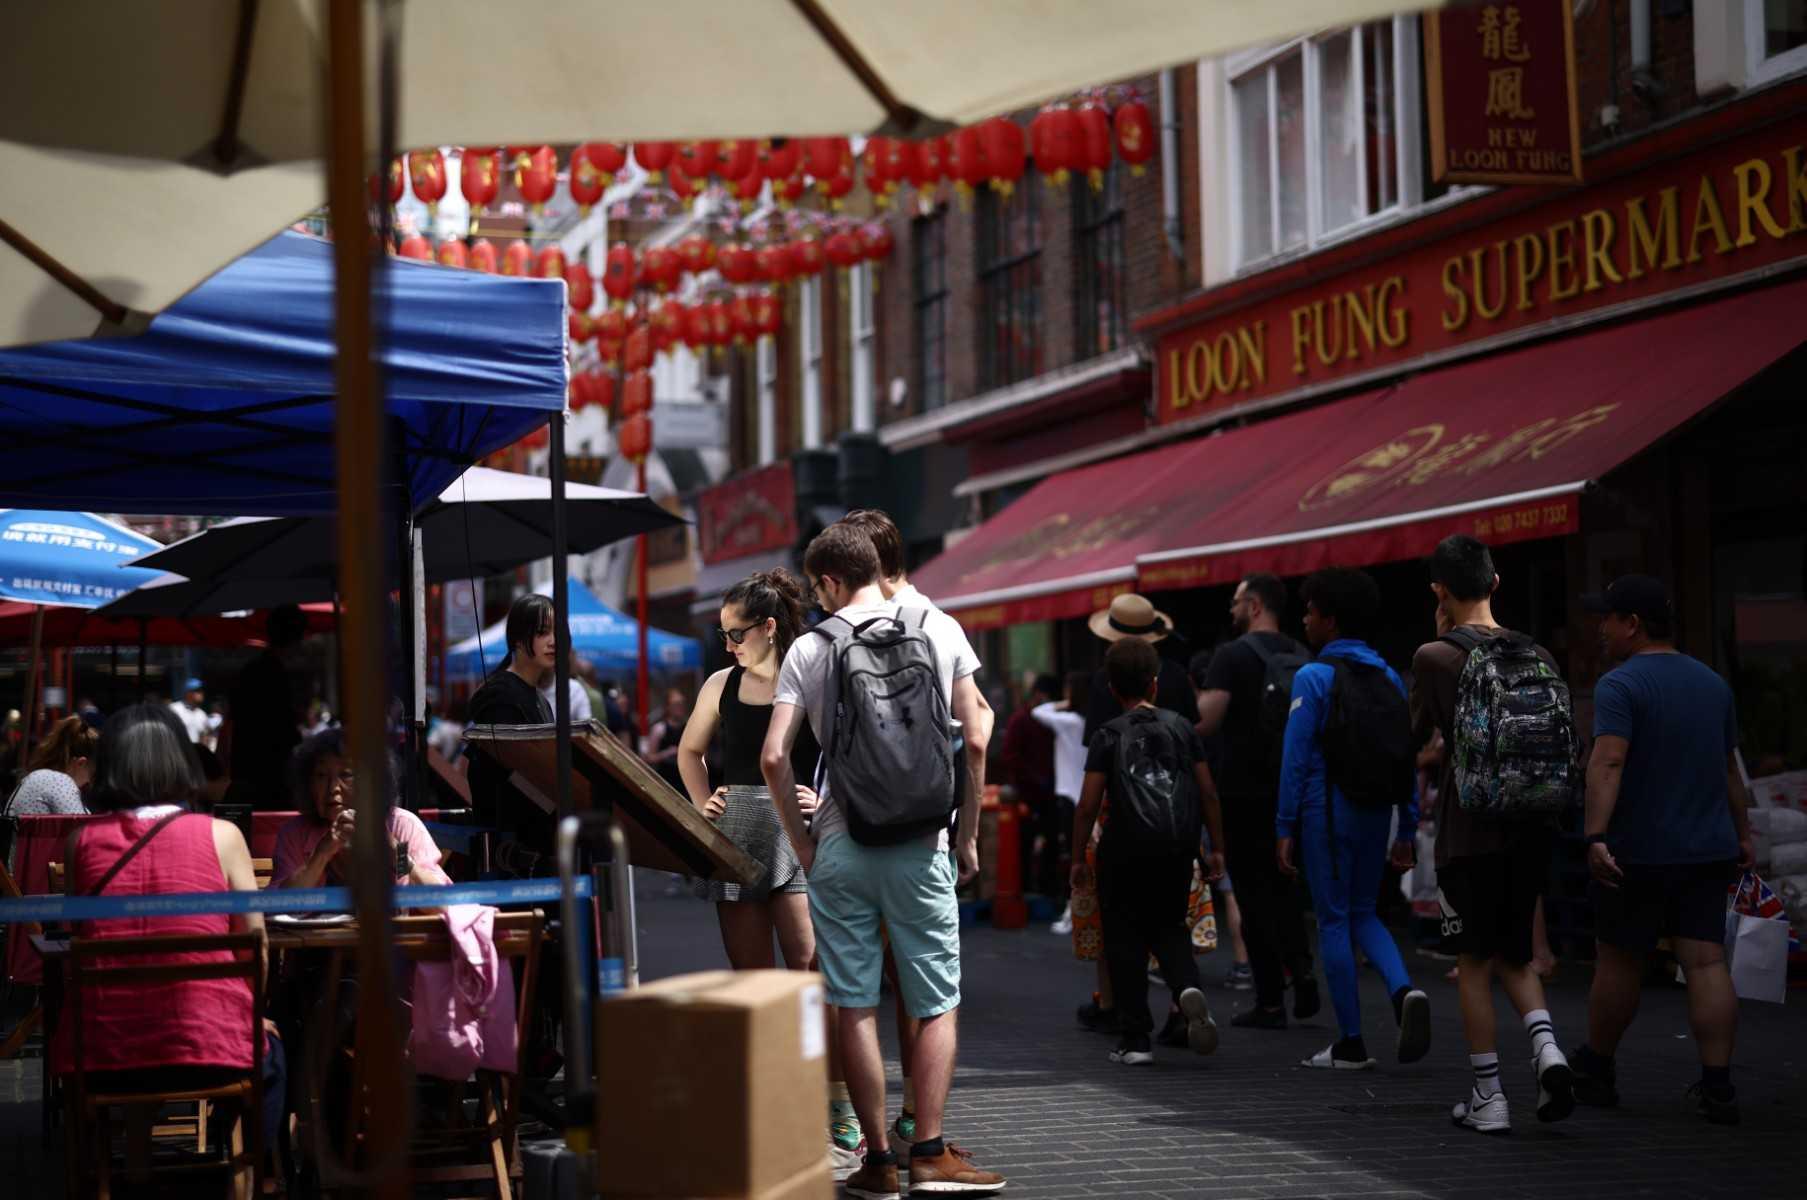 Members of the public read the menu outside a restaurant in the Chinatown area of Soho in London on June 18. Photo: AFP 